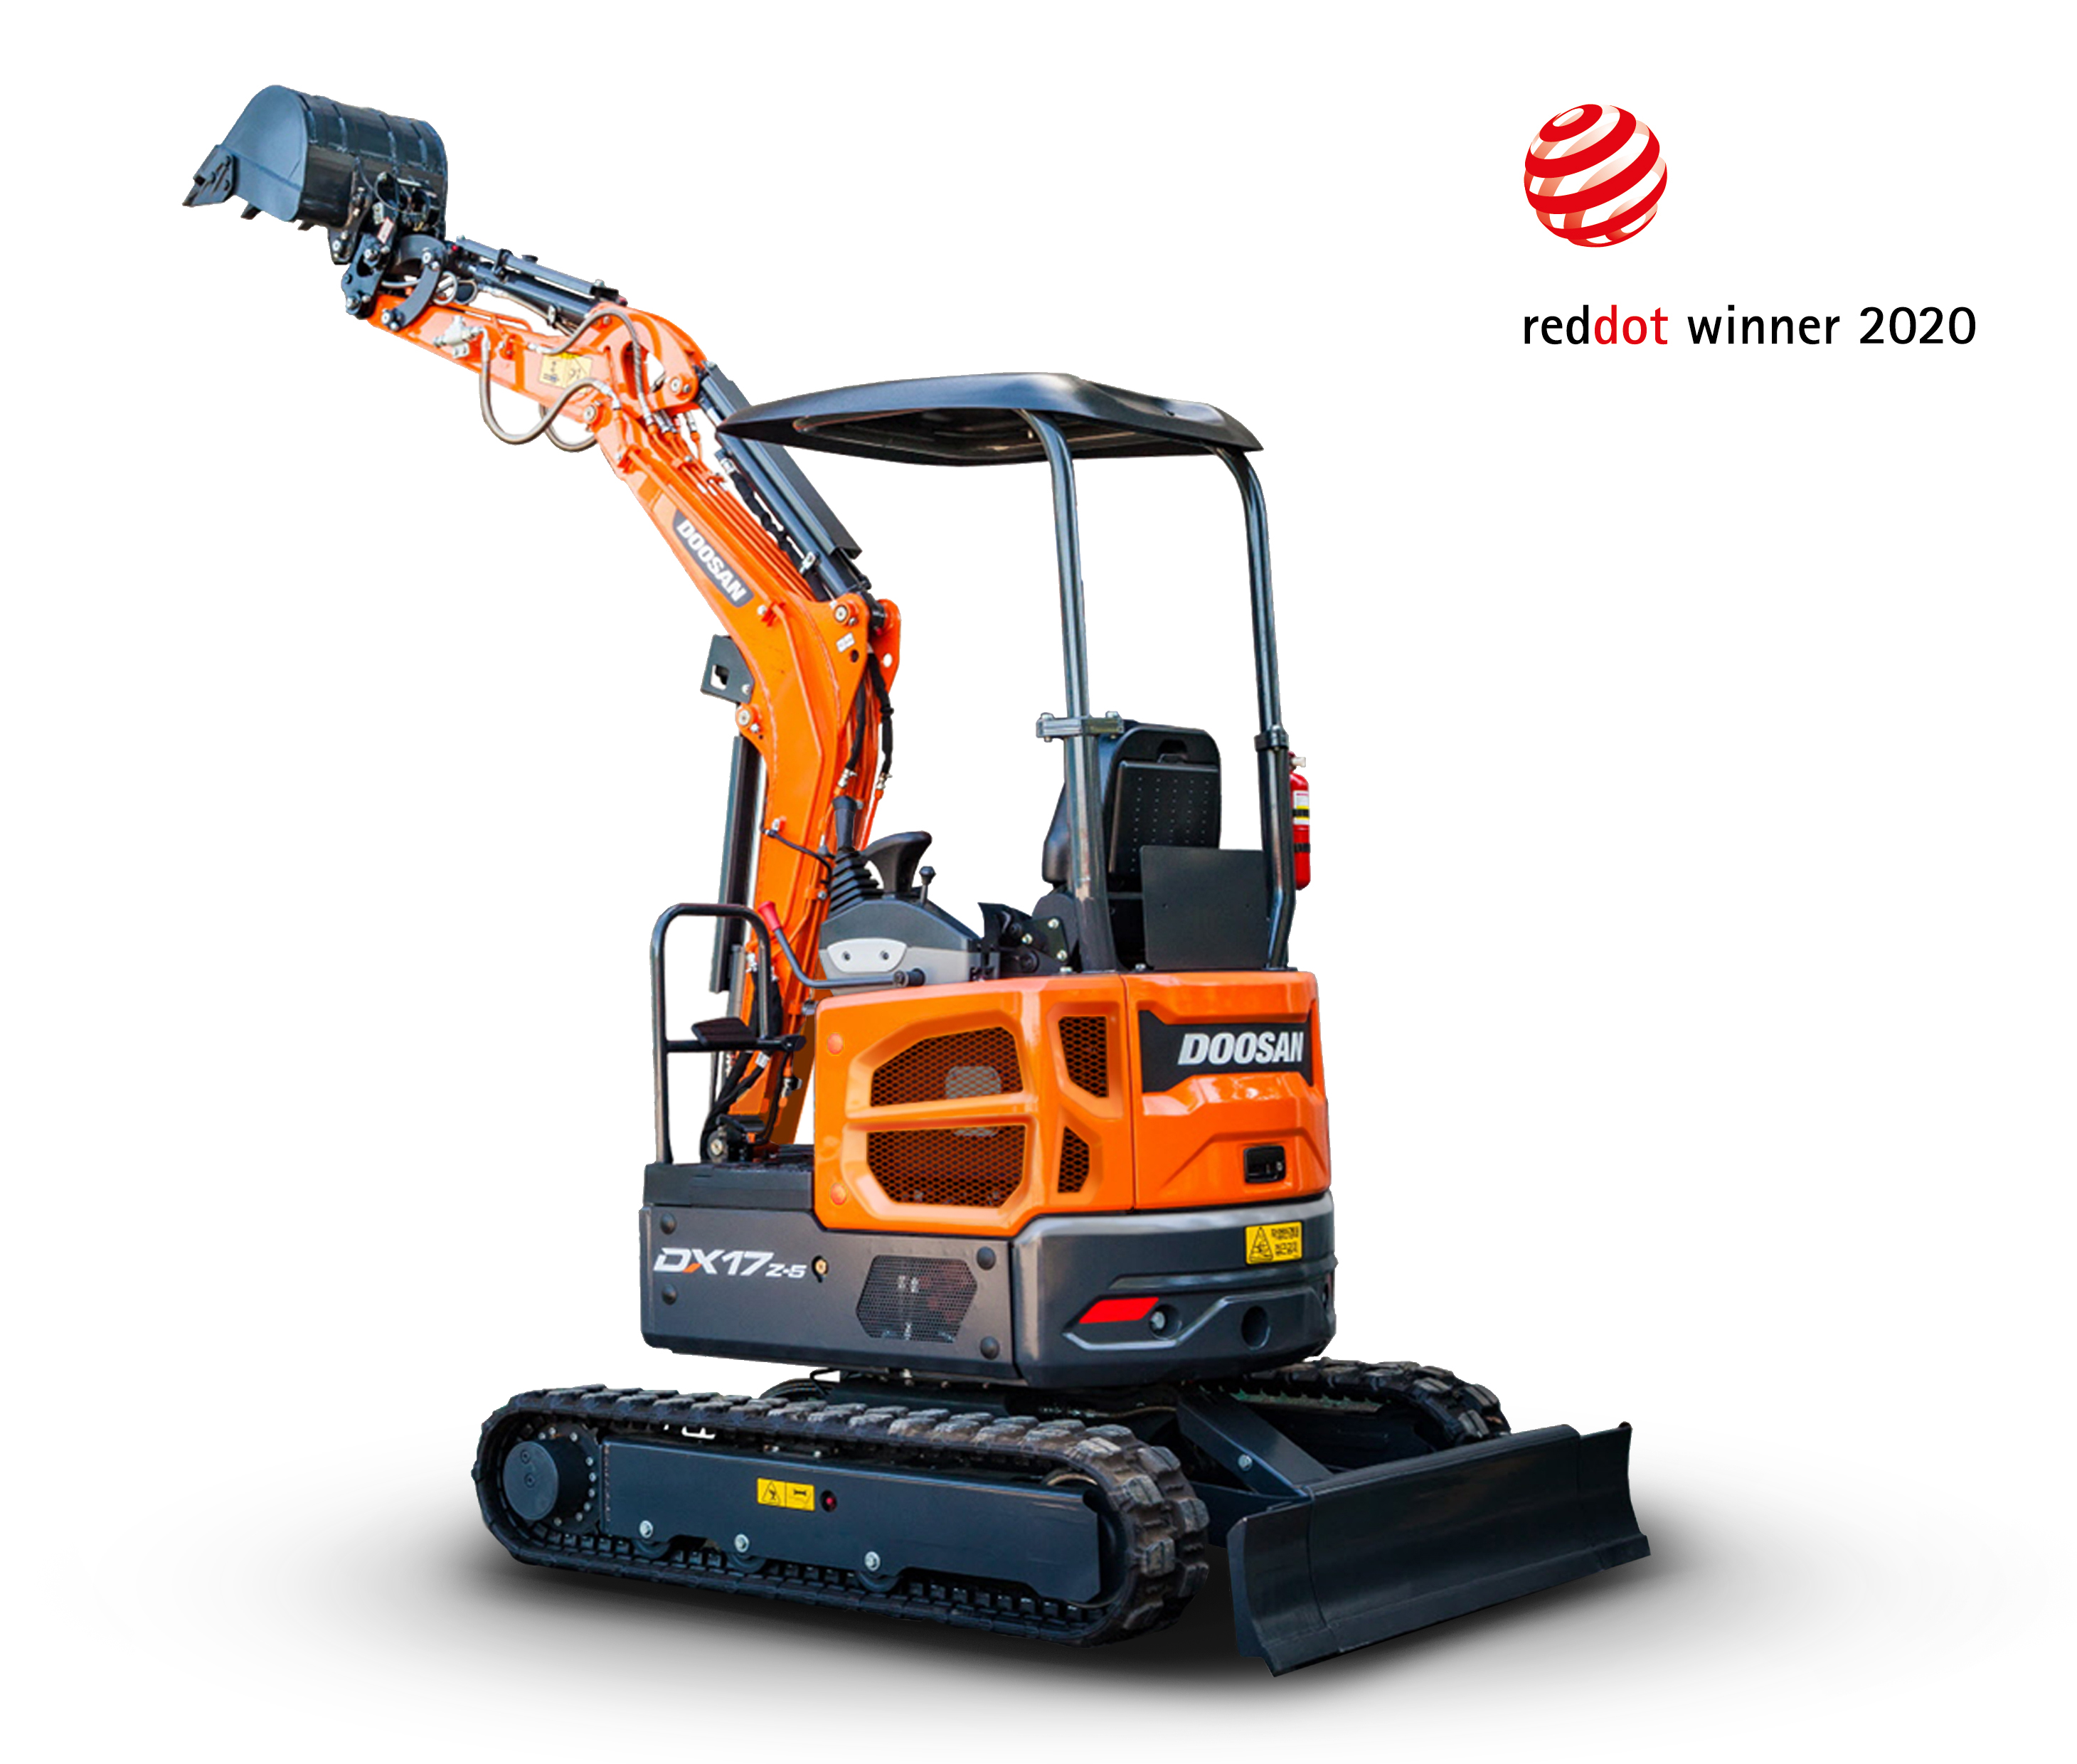 The DX17z-5 model has been recognized for its outstanding competitiveness in design, as well winning the 2020 Red Dot Design Award and the 2019 Pin Up Design Award. 